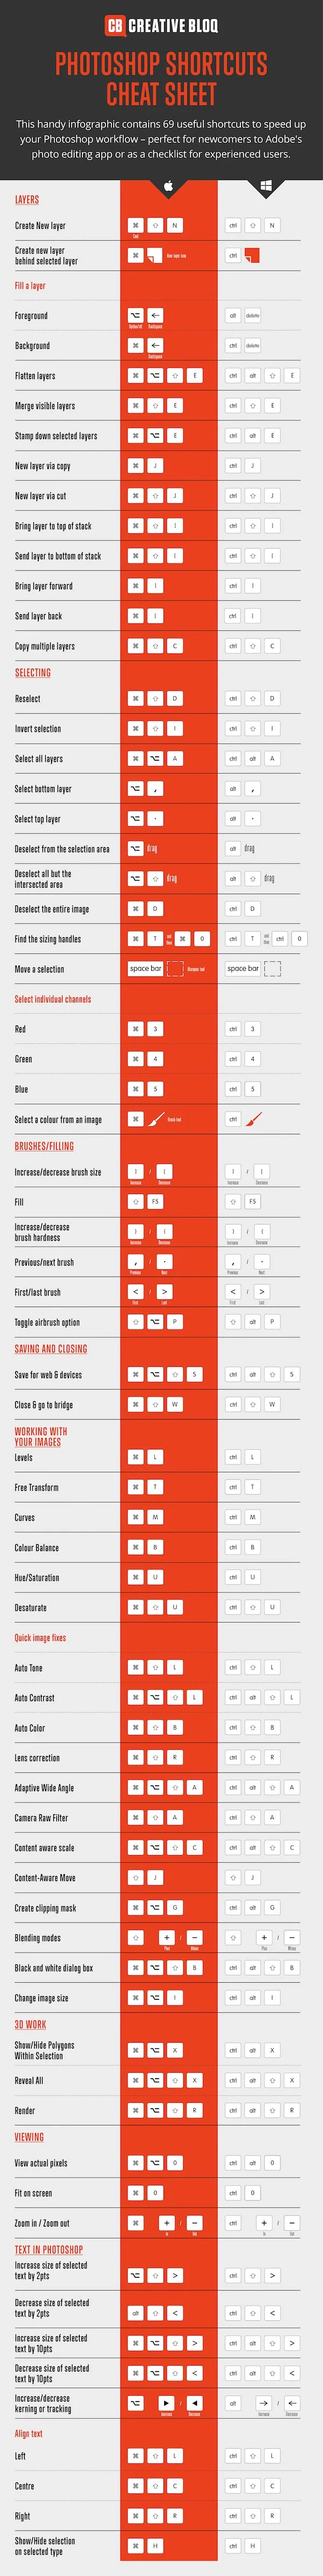 69 incredibly useful Photoshop shortcuts - #infographic